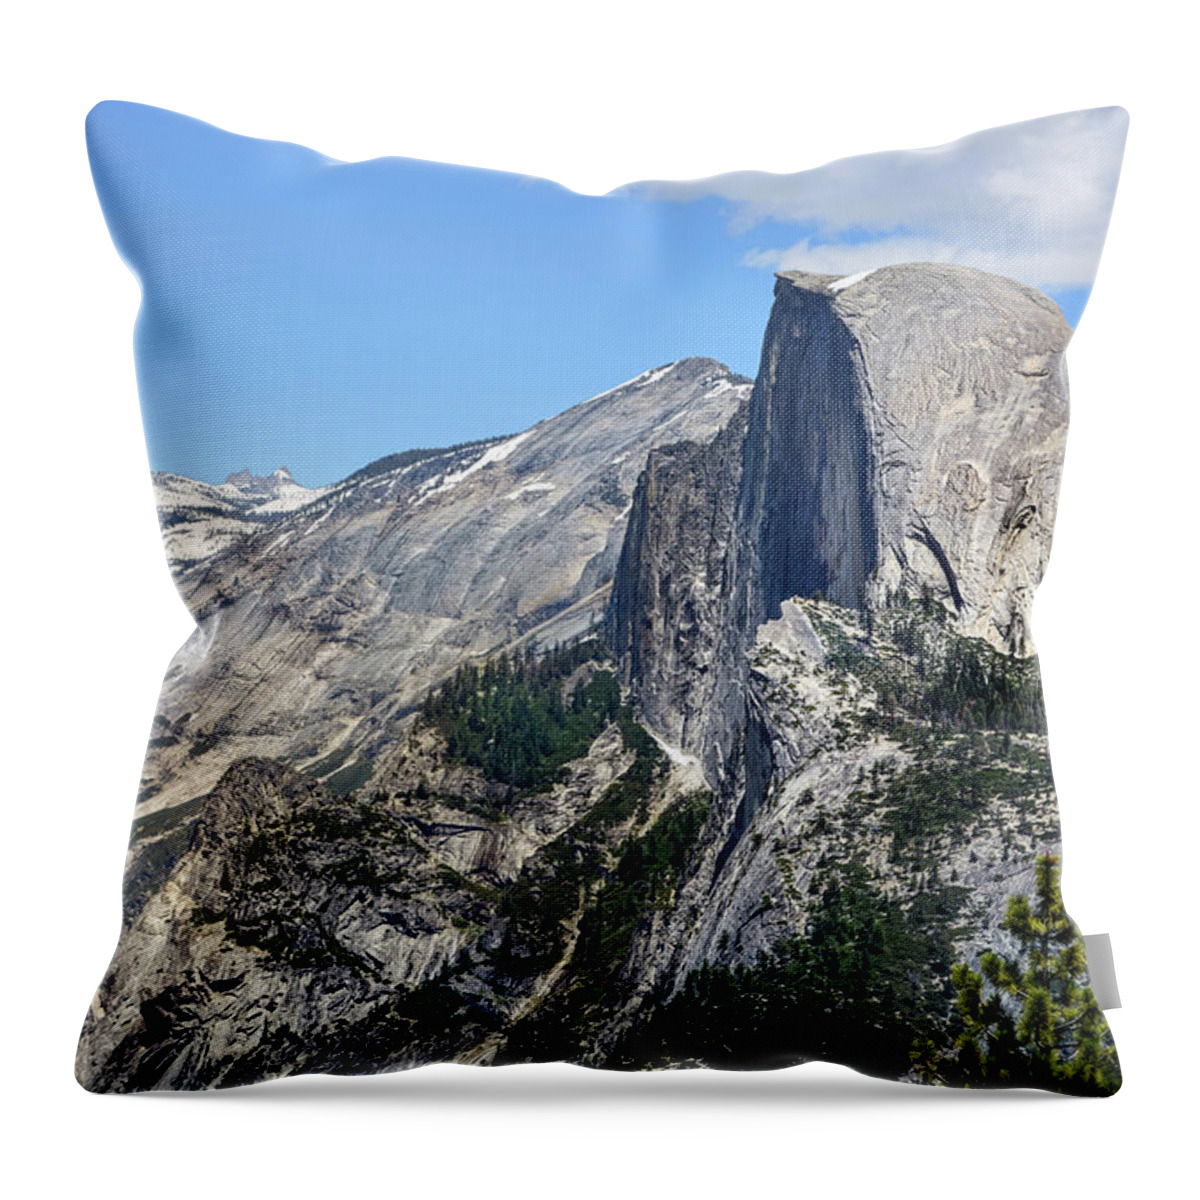 Yosemite National Park Throw Pillow featuring the photograph Half Dome at Glacier Point, Yosemite by Brian Tada